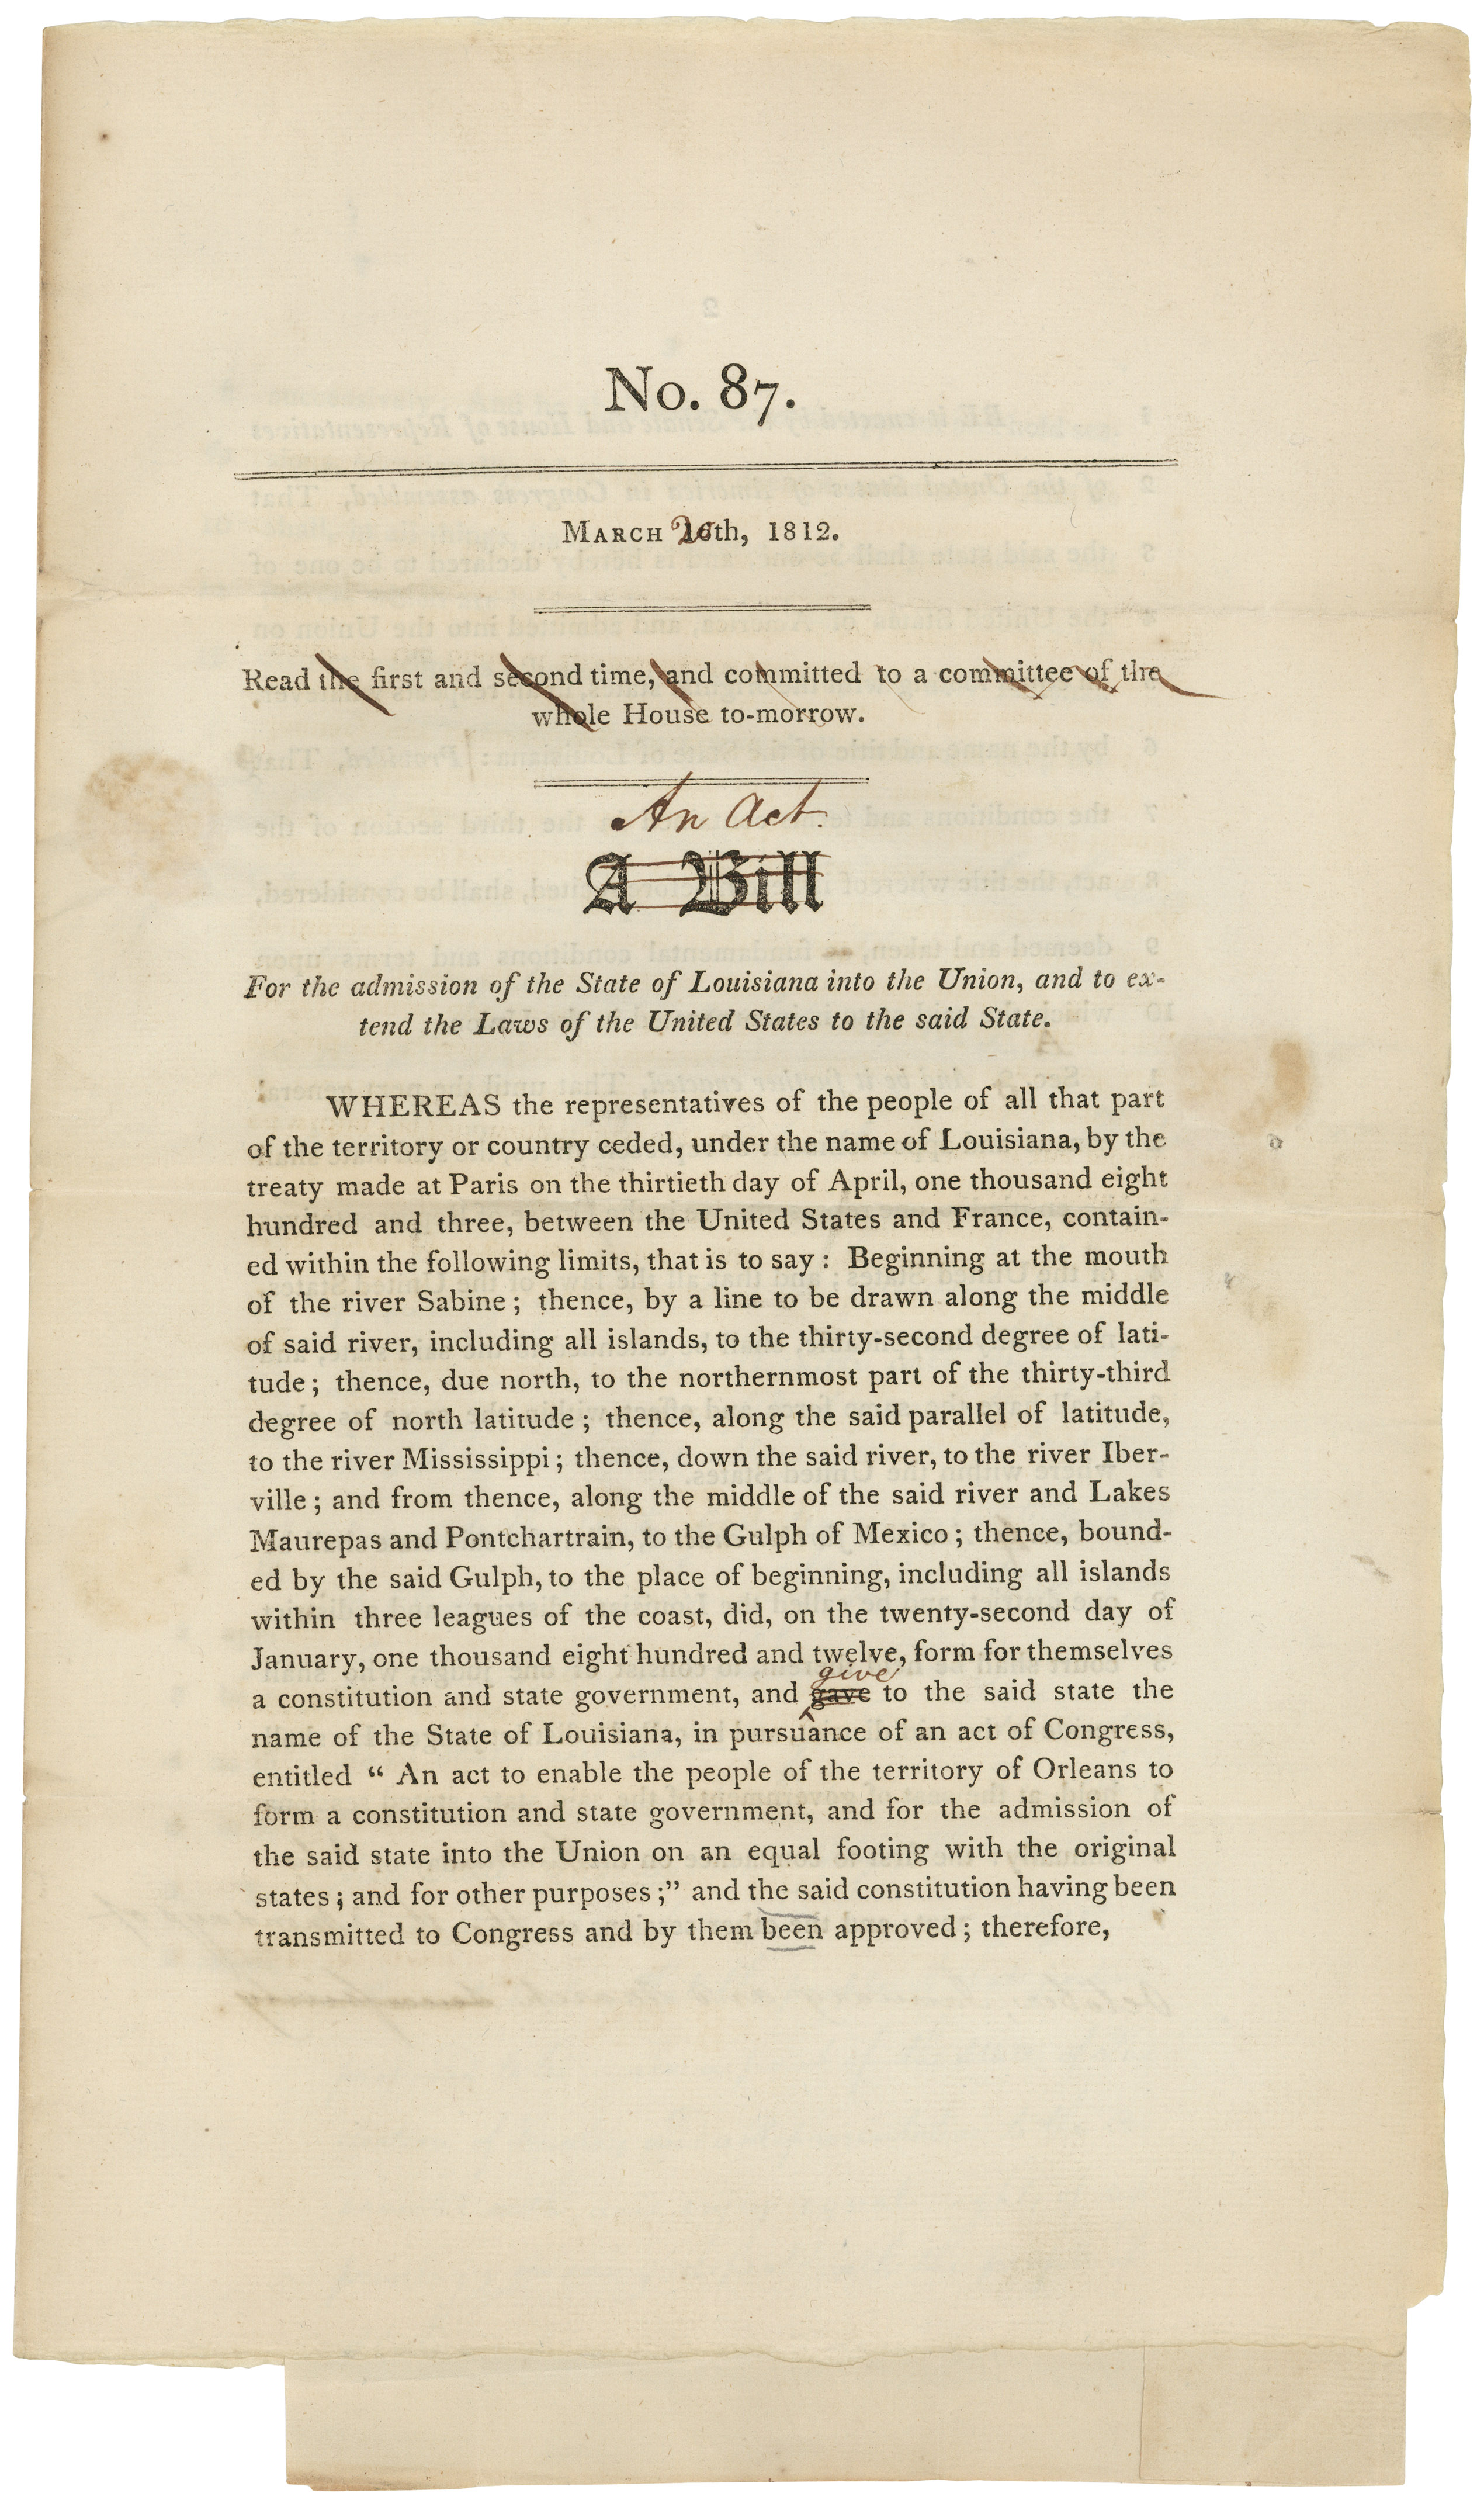 H.R. 88, An act for the admission of the State of Louisiana into the Union, March 20, 1812 ...